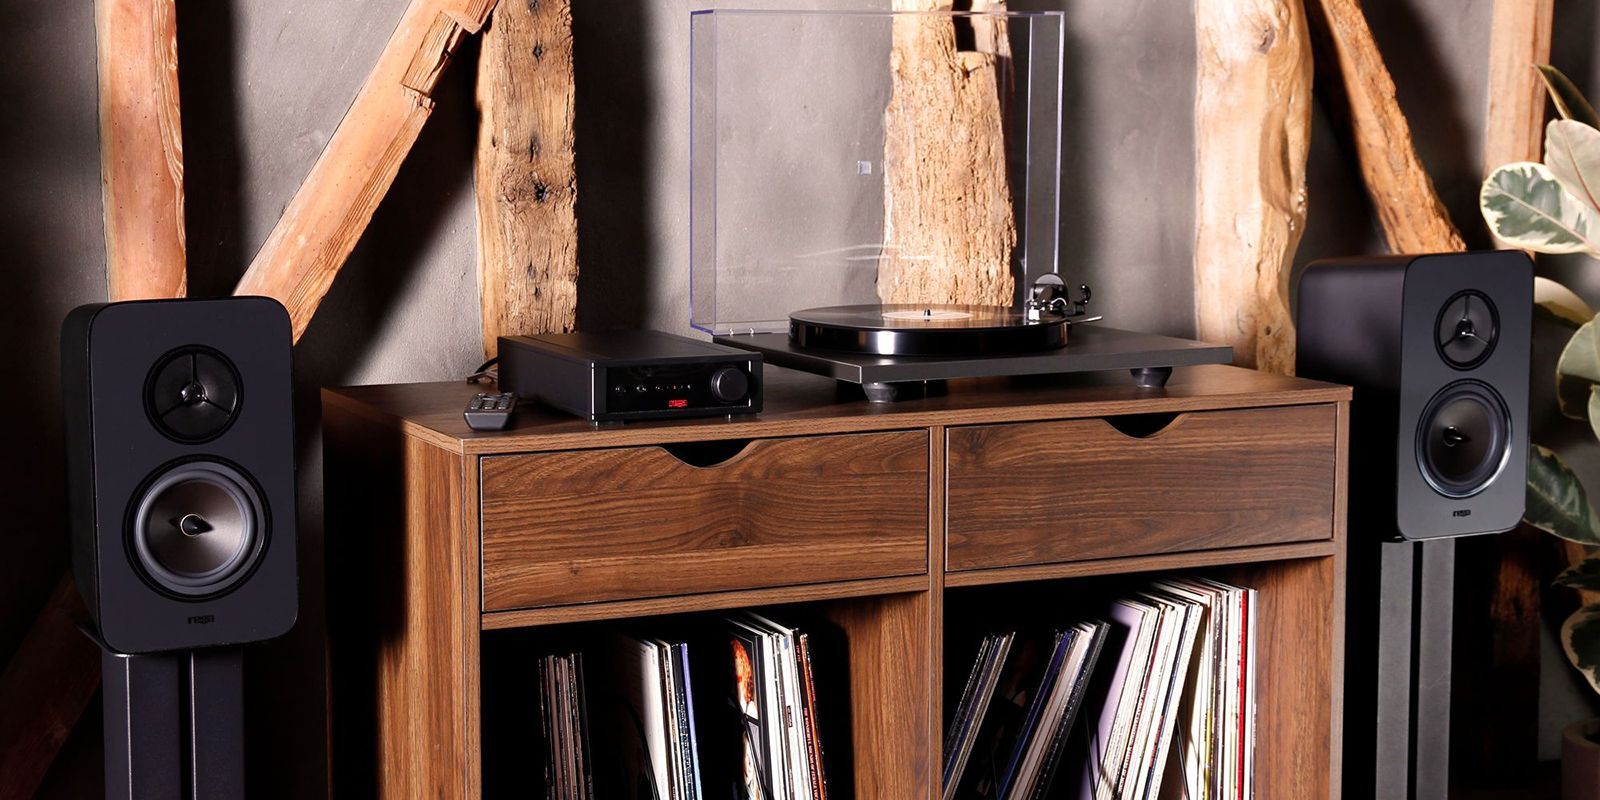 The Rega System One the ultimate audio experience Hi-Fi System surounding shelf of vinyl records